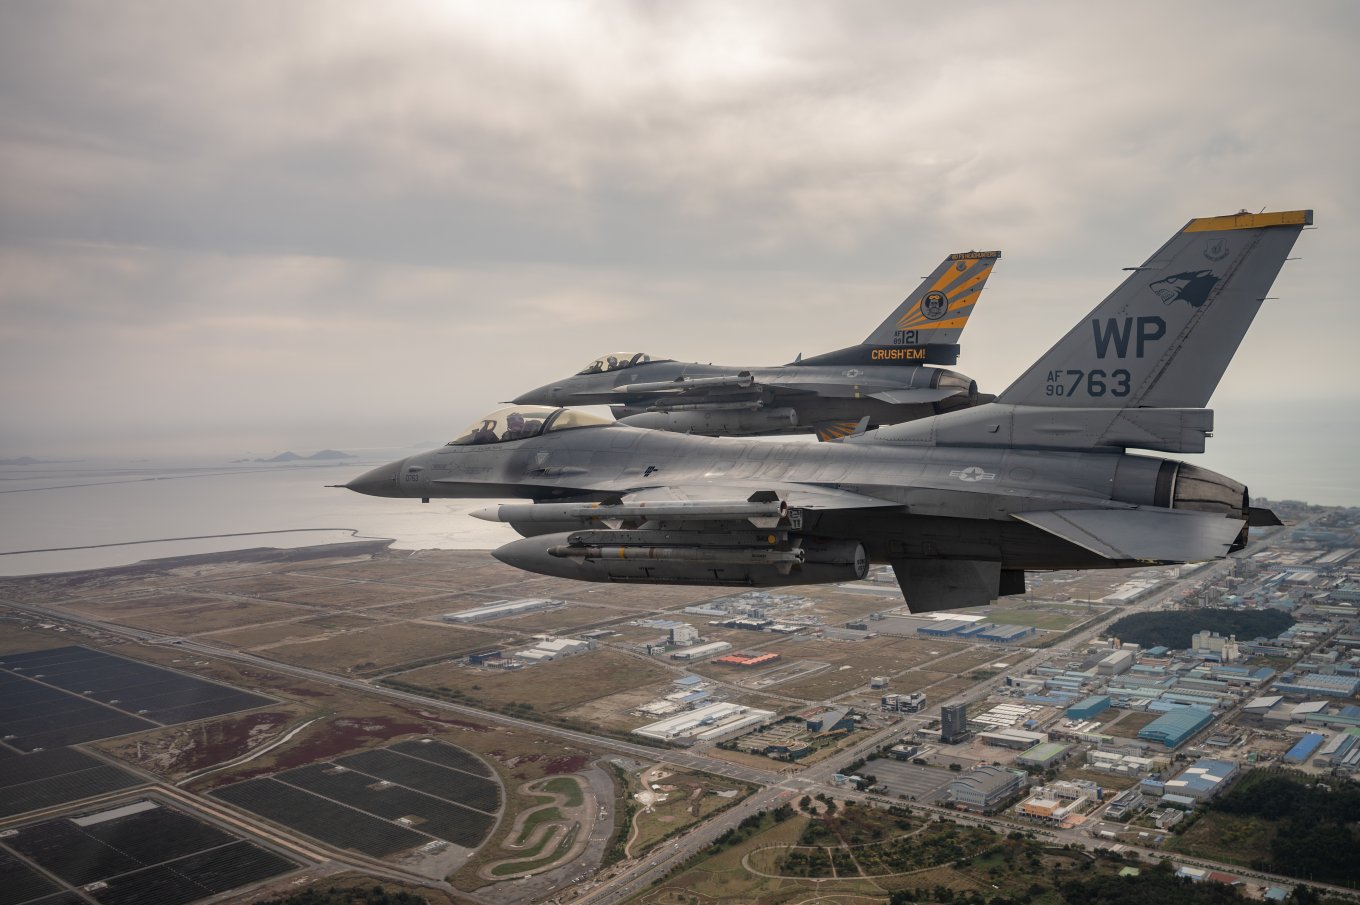 The F-16 fighters of the U.S. Air Force Defense Express The First Dutch F-16 Aircraft Have Been Sent to Romania to Train Ukrainian Pilots